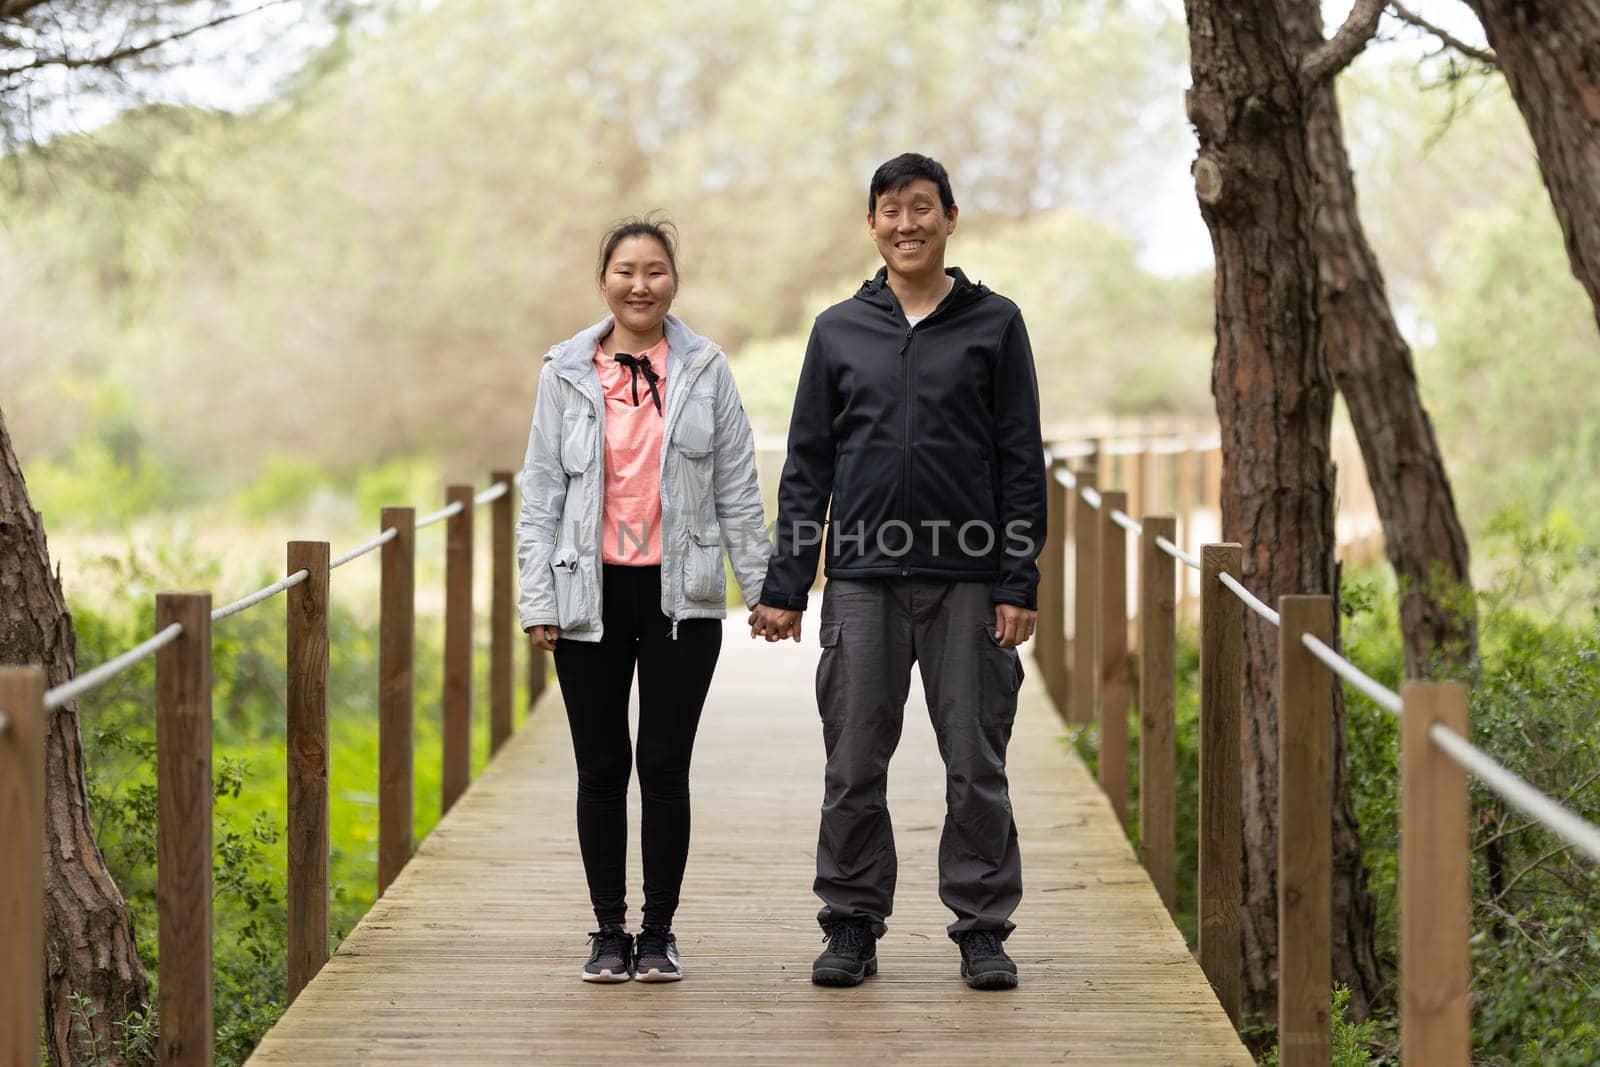 A man and woman are standing on a wooden bridge, holding hands. Scene is warm and affectionate, as the couple shares a moment together